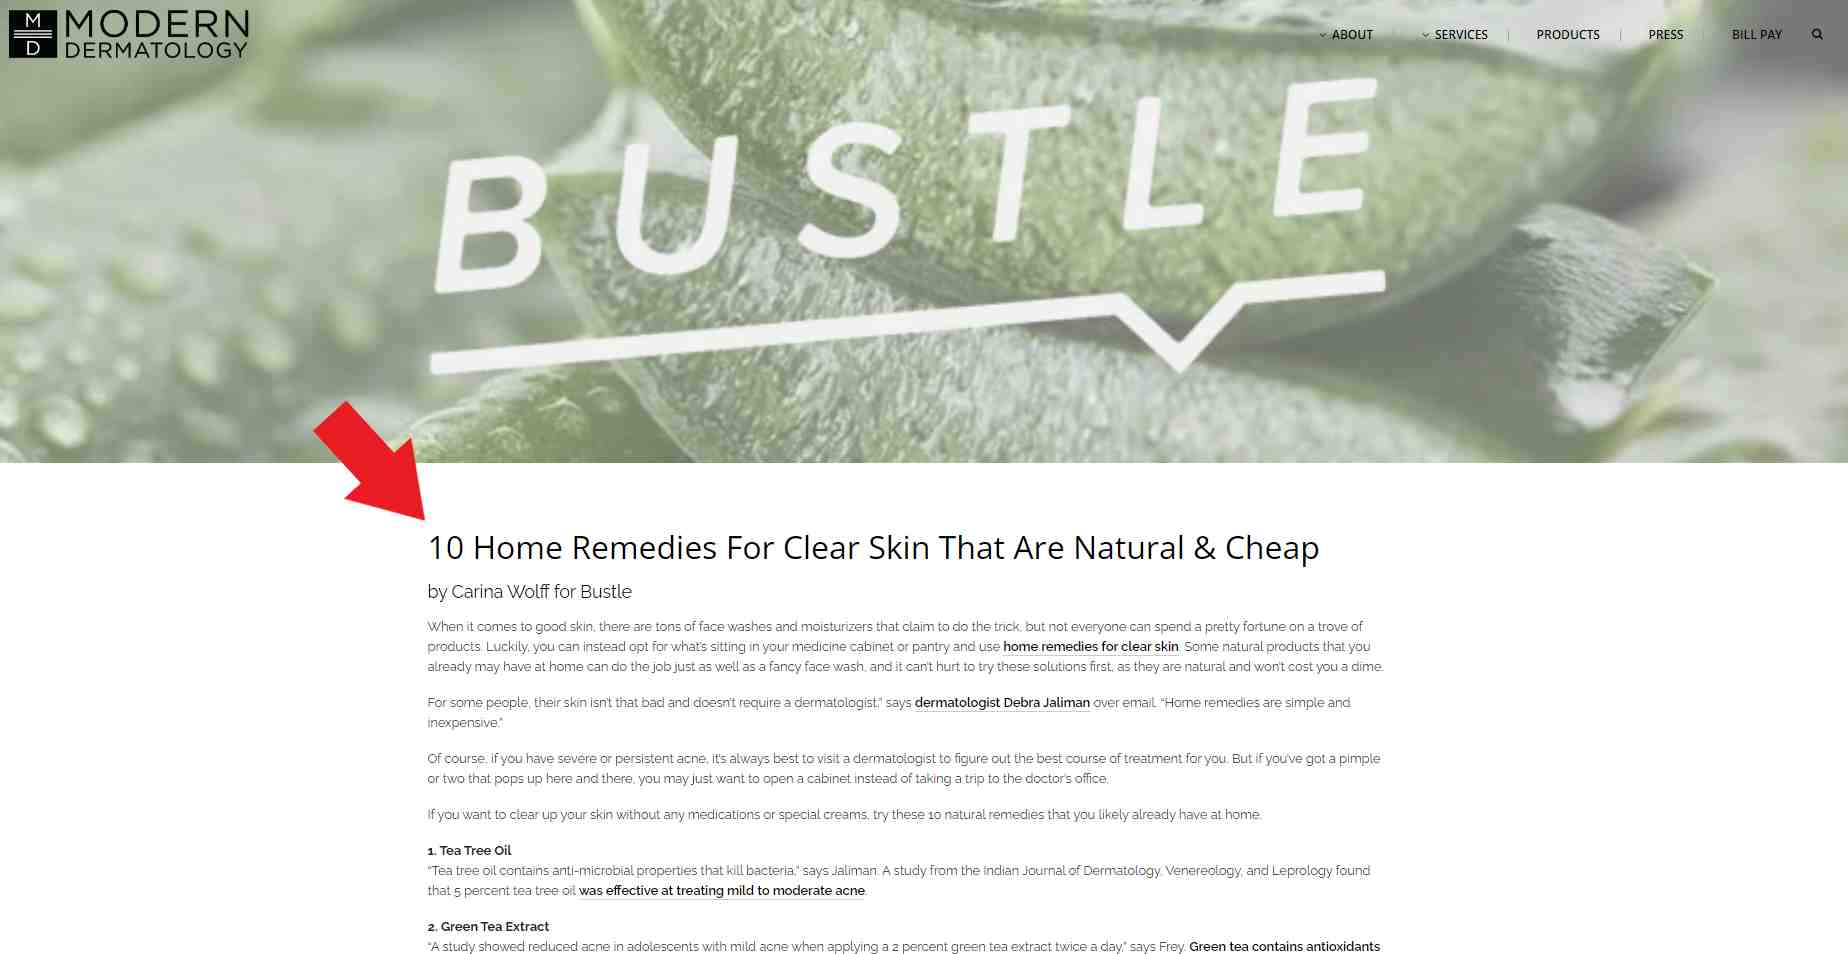 At-home remedies for clear skin